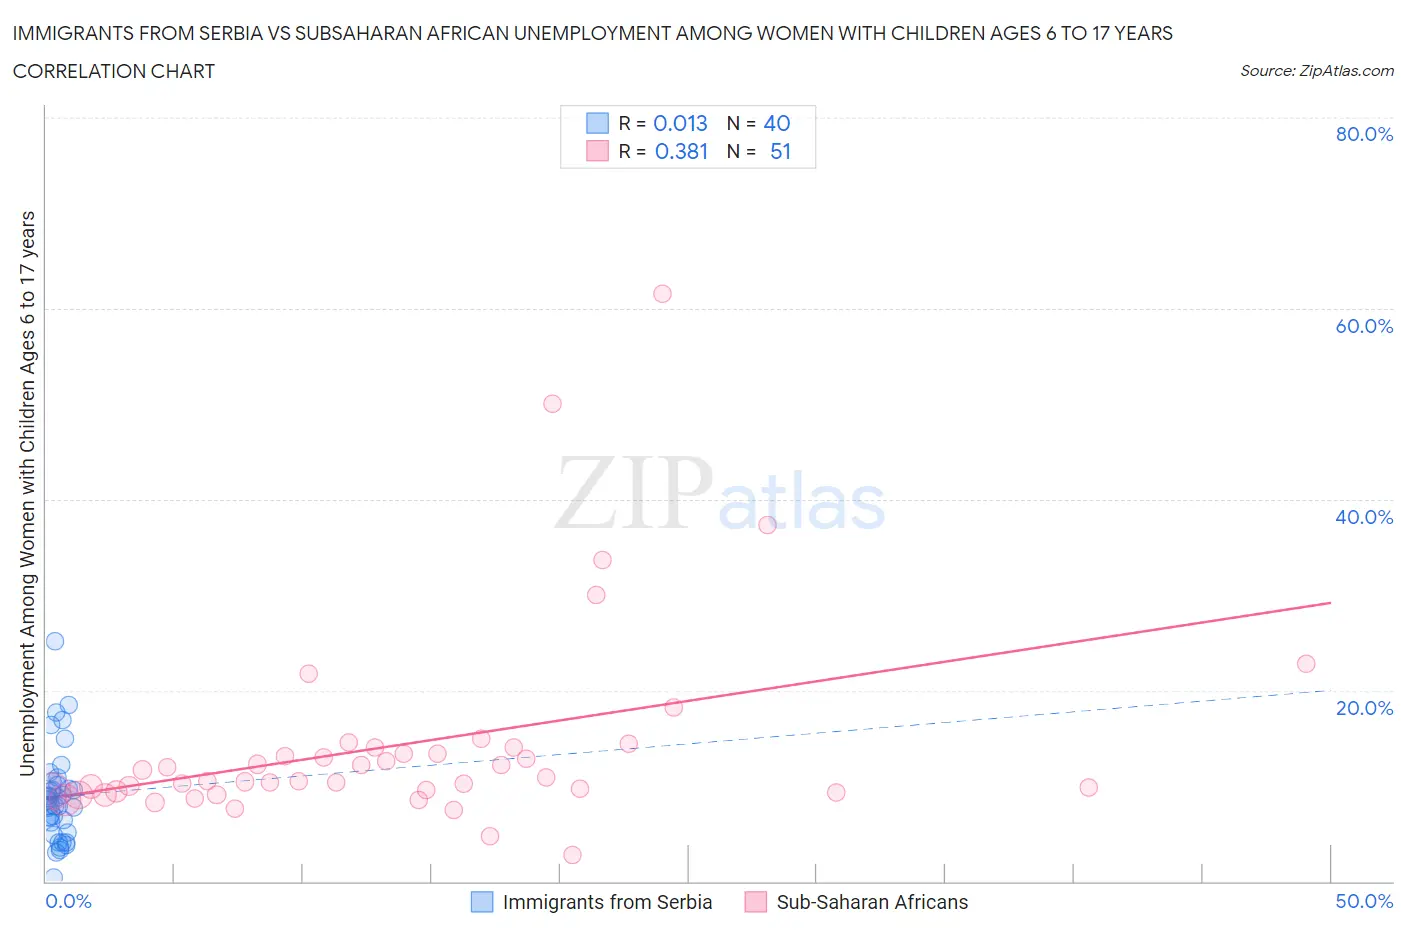 Immigrants from Serbia vs Subsaharan African Unemployment Among Women with Children Ages 6 to 17 years